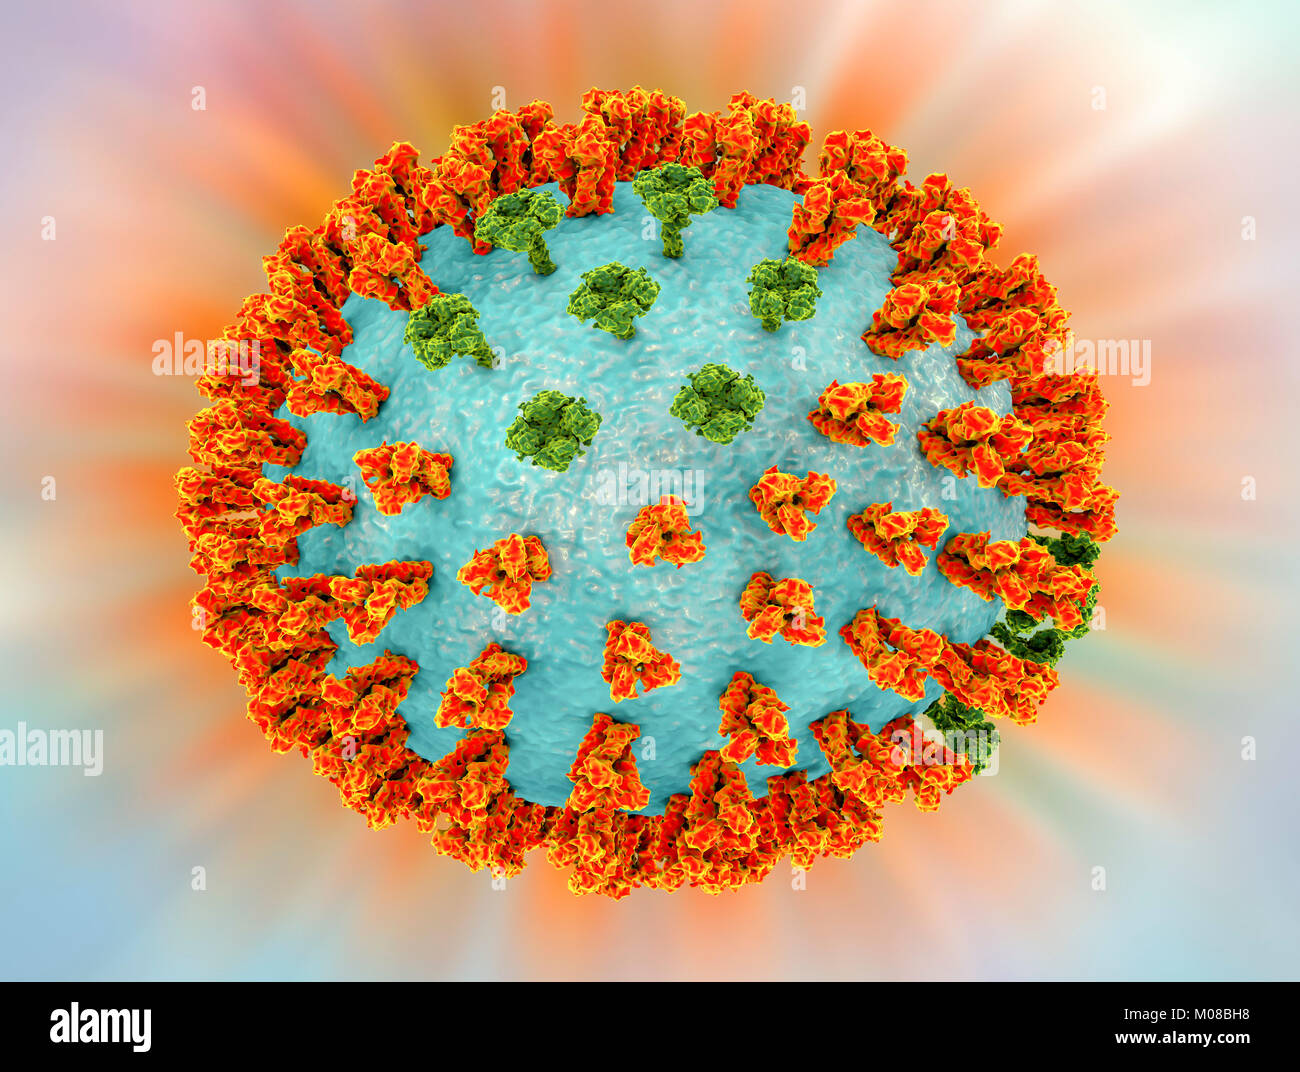 Influenza virus H3N2 strain. 3D illustration showing surface glycoprotein spikes hemagglutinin (orange) and neuraminidase (green) on an influenza (flu) virus particle. Haemagglutinin plays a role in attachment of the virus to human respiratory cells. Neuraminidase plays a role in releasing newly formed virus particles from an infected cell. H3N2 viruses are able to infect birds and mammals as well as humans. They often cause more severe infections in the young and elderly than other flu strains and can lead to increases in hospitalisations and deaths. Stock Photo